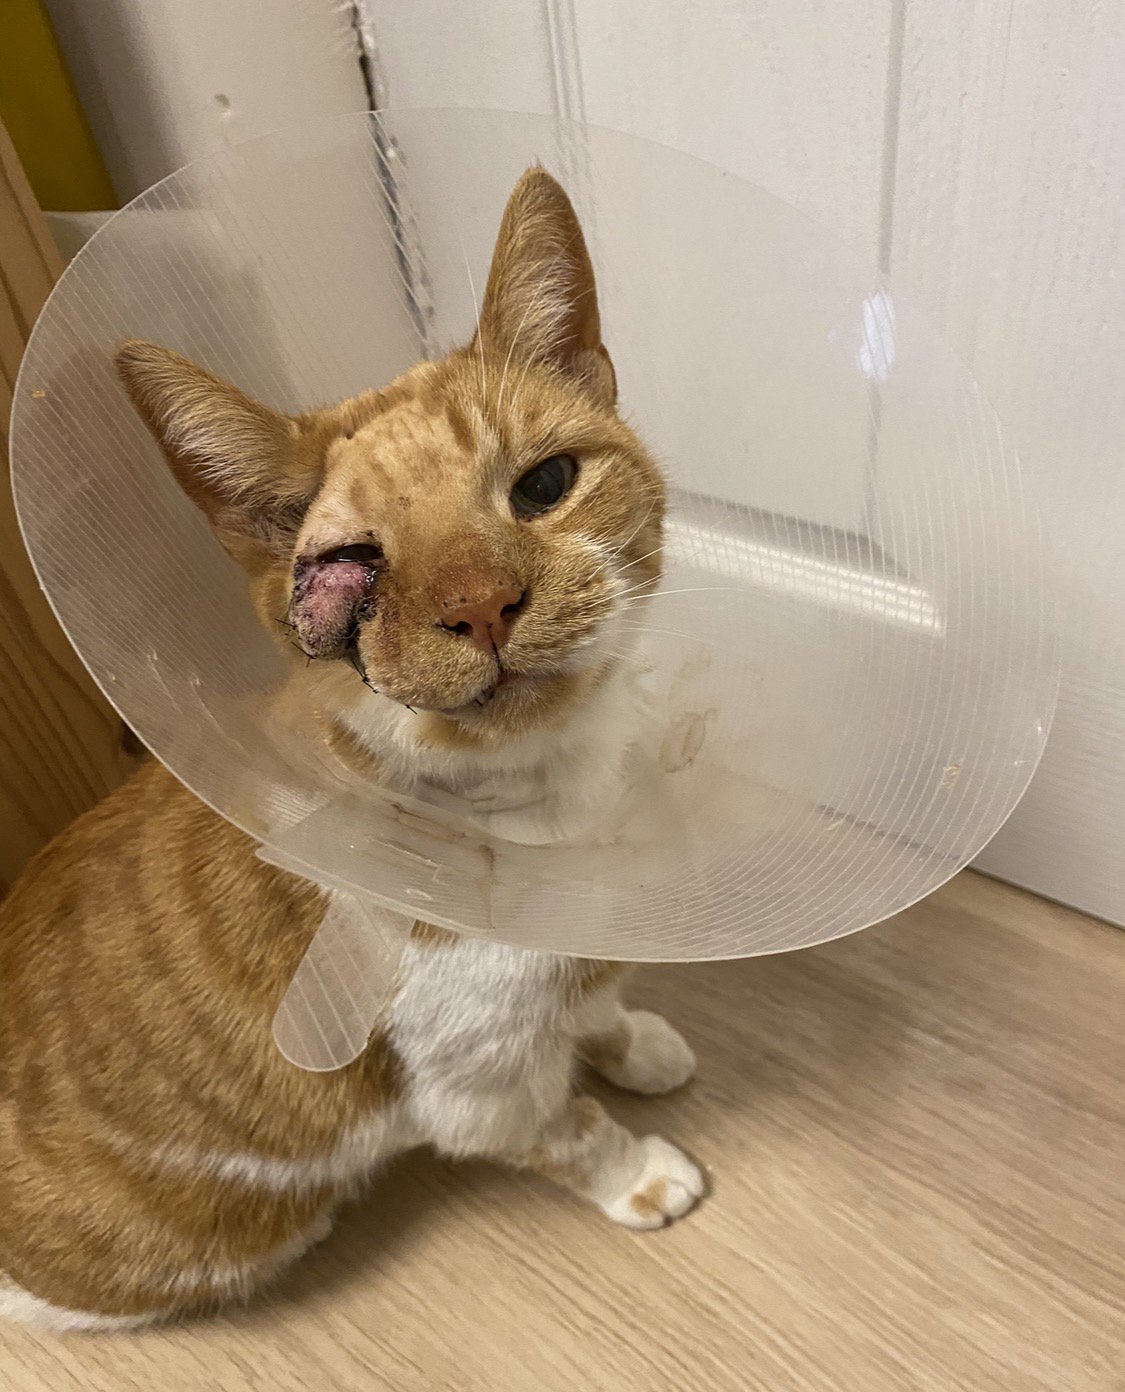 Cat looking toward the camera wearing an Elizabethan collar and with a swollen right eyelid